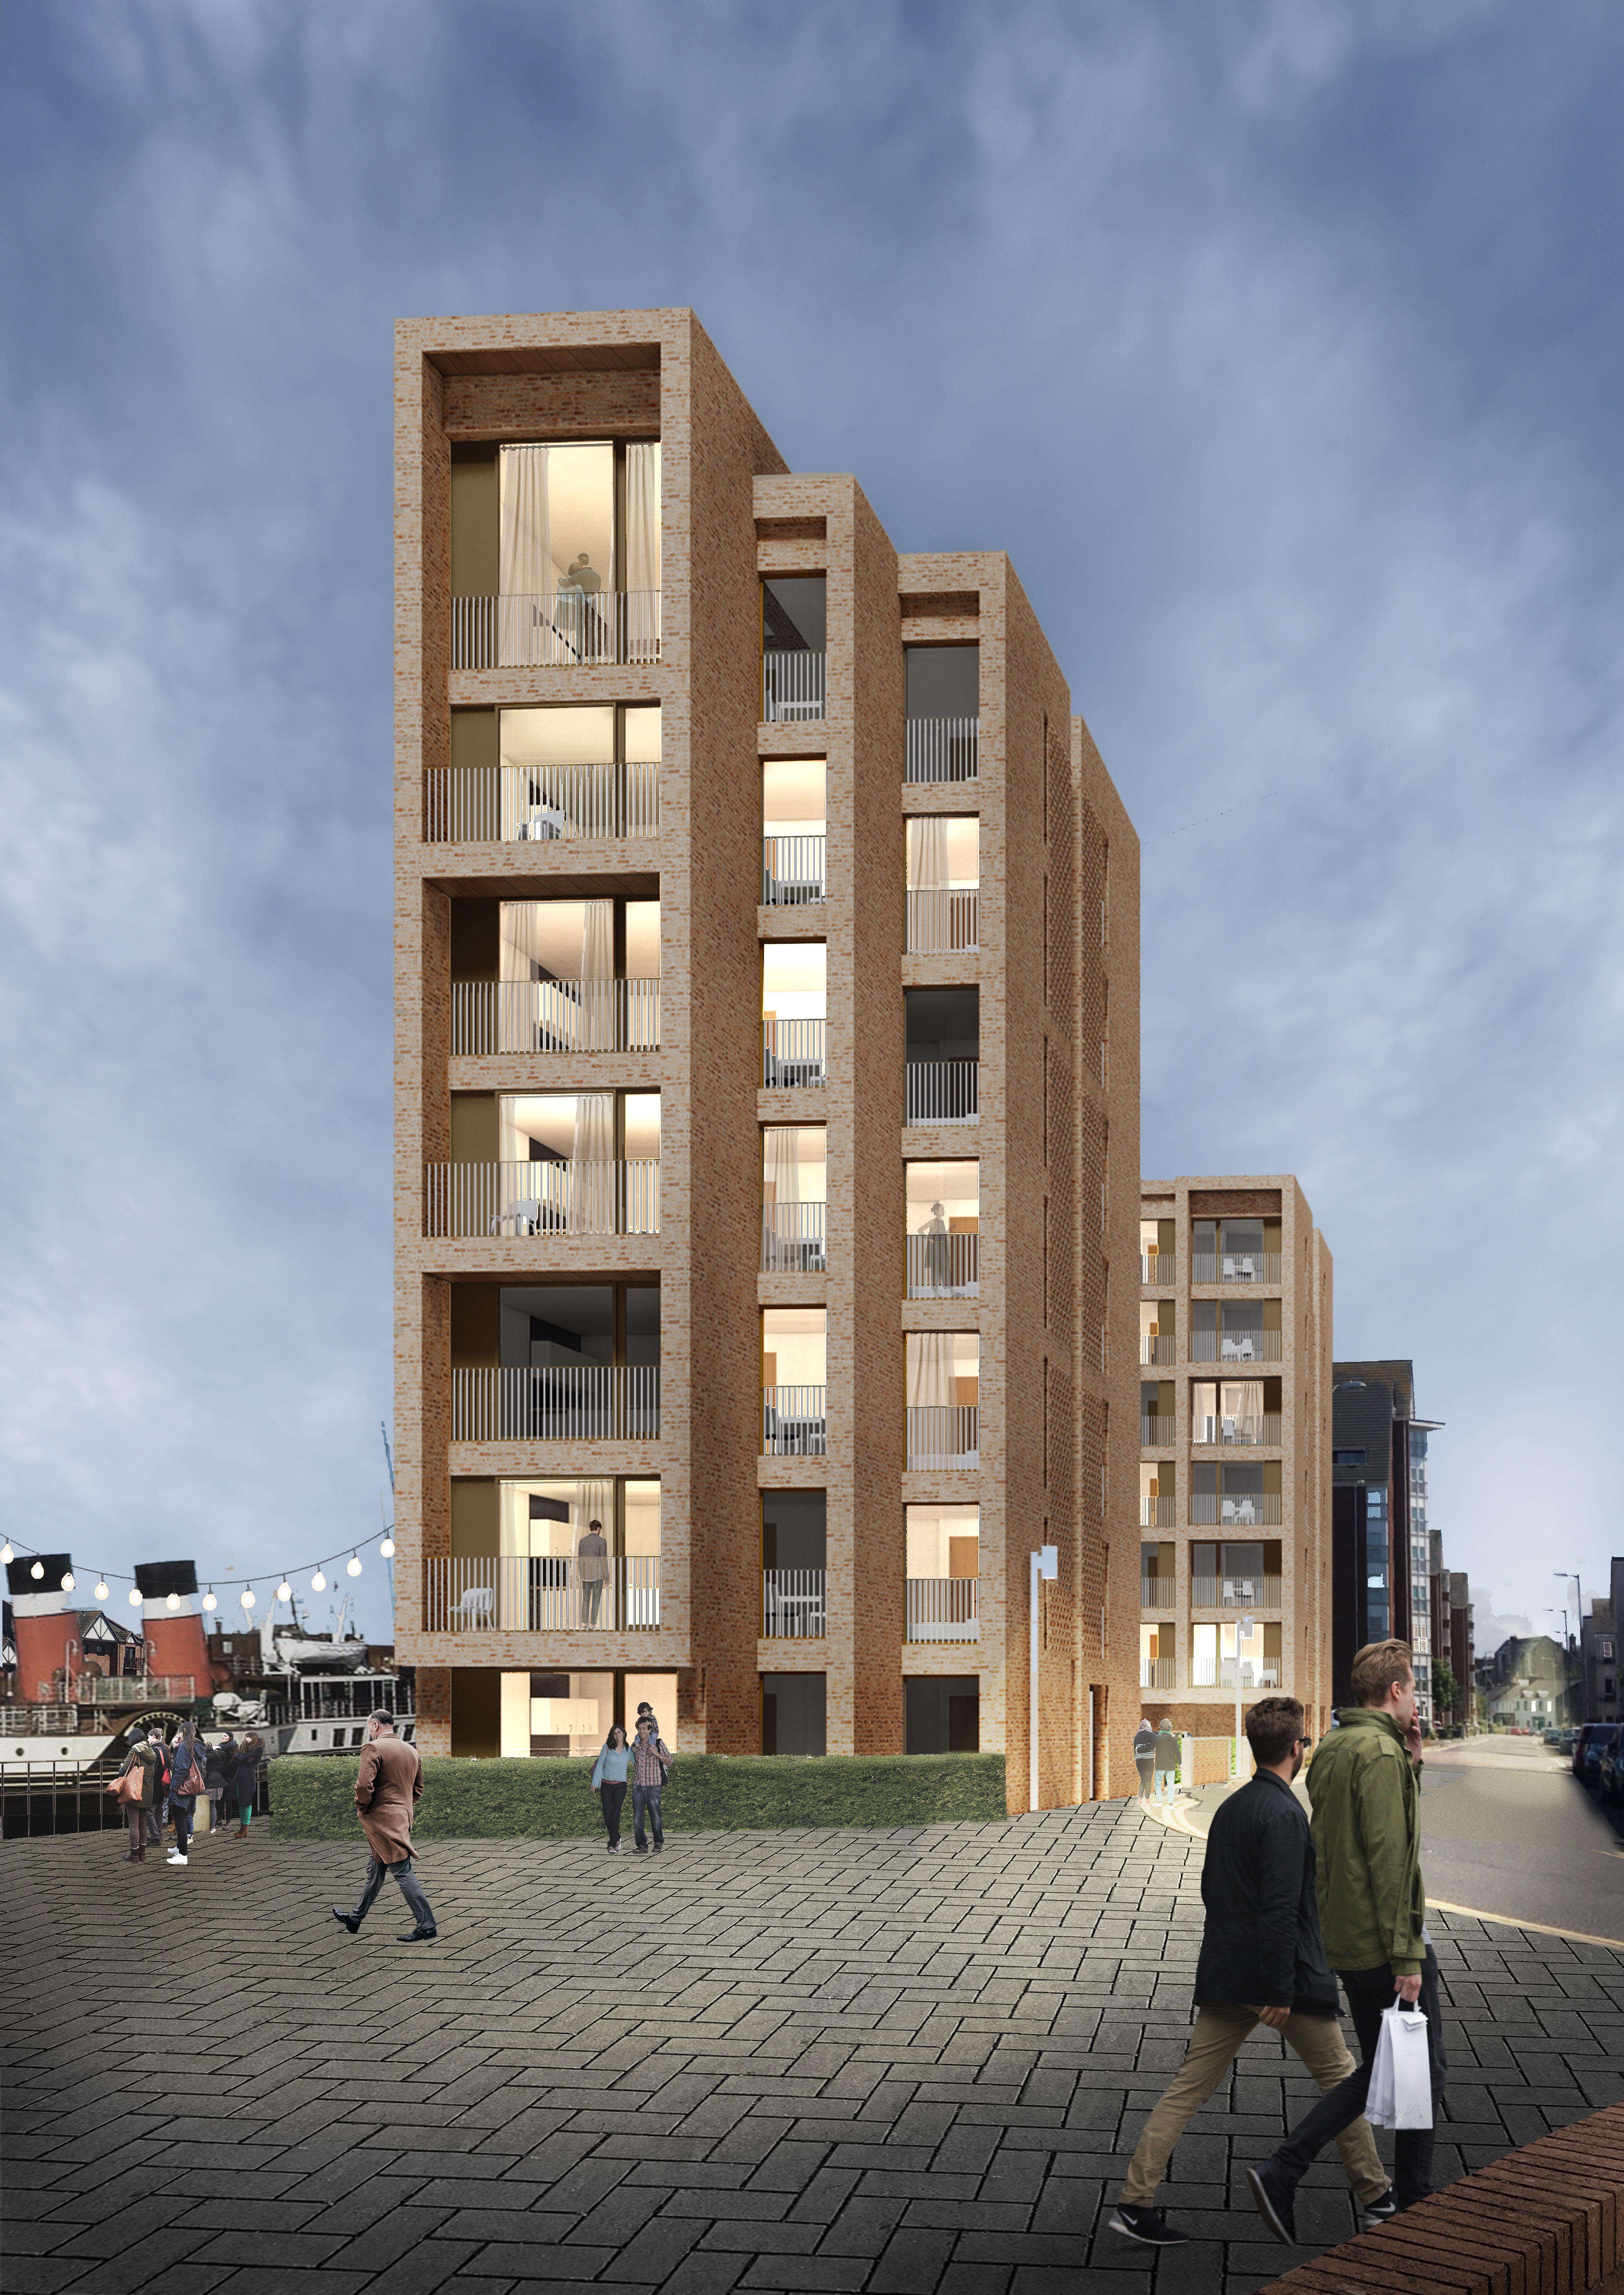 Housing association submits plans for 40 flats on Ayr's harbourside